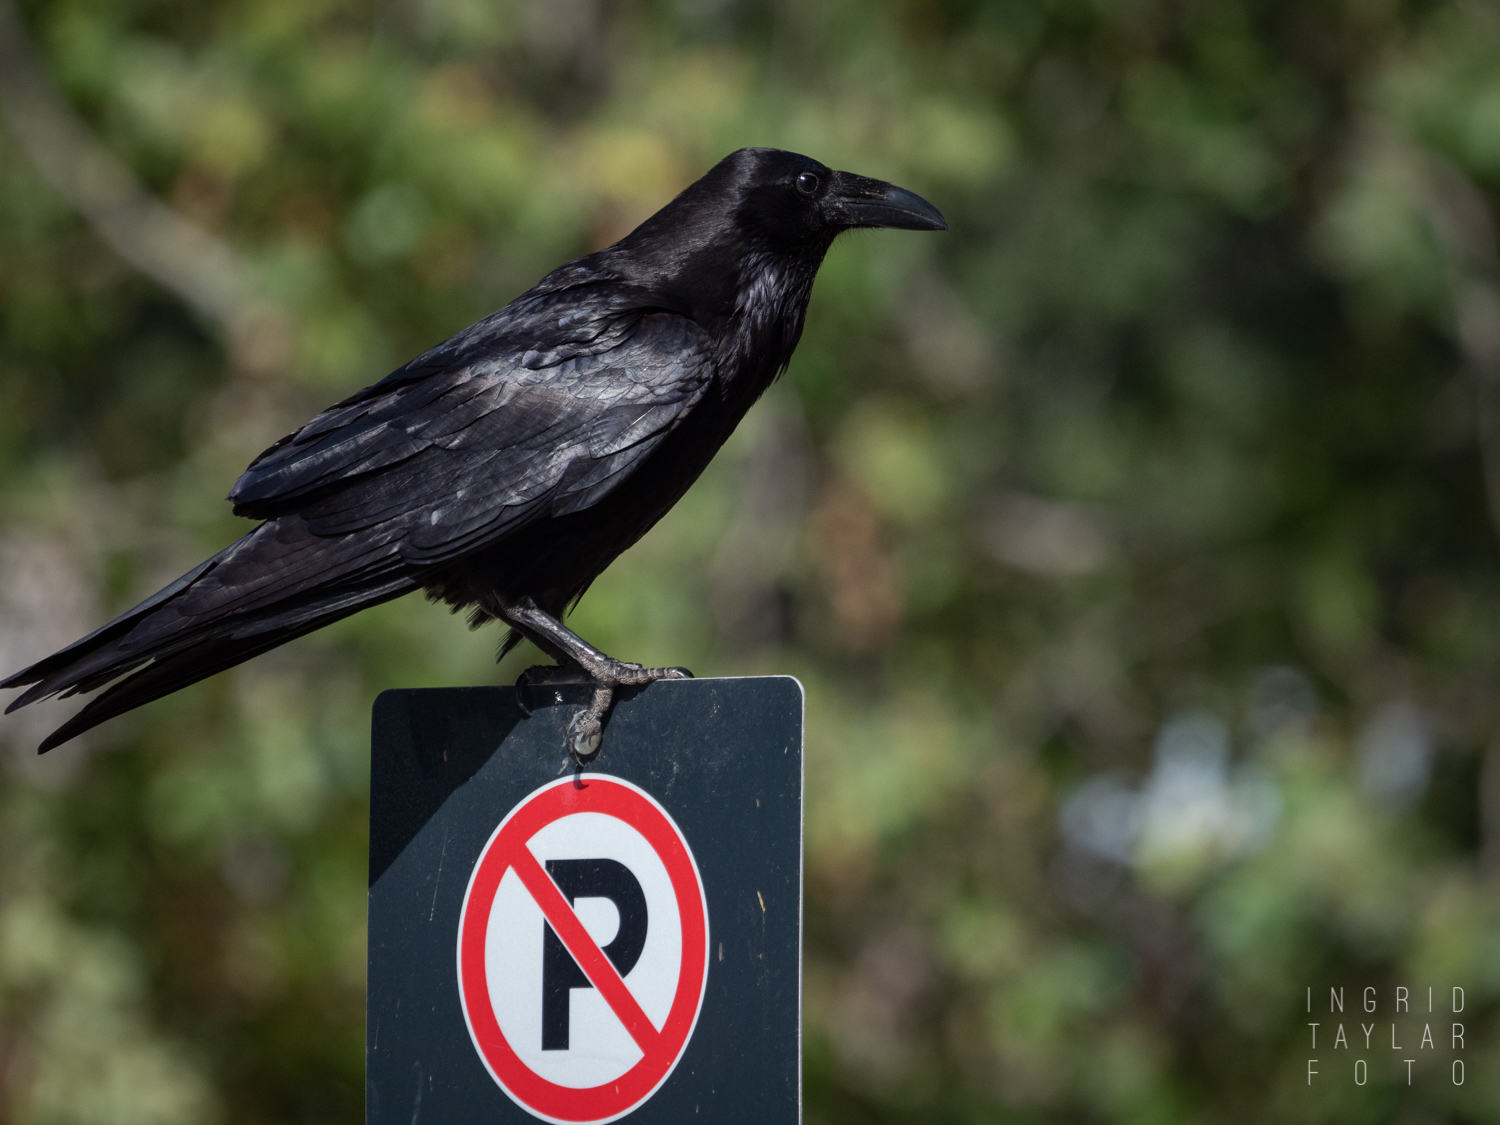 Common Raven on No Parking Sign